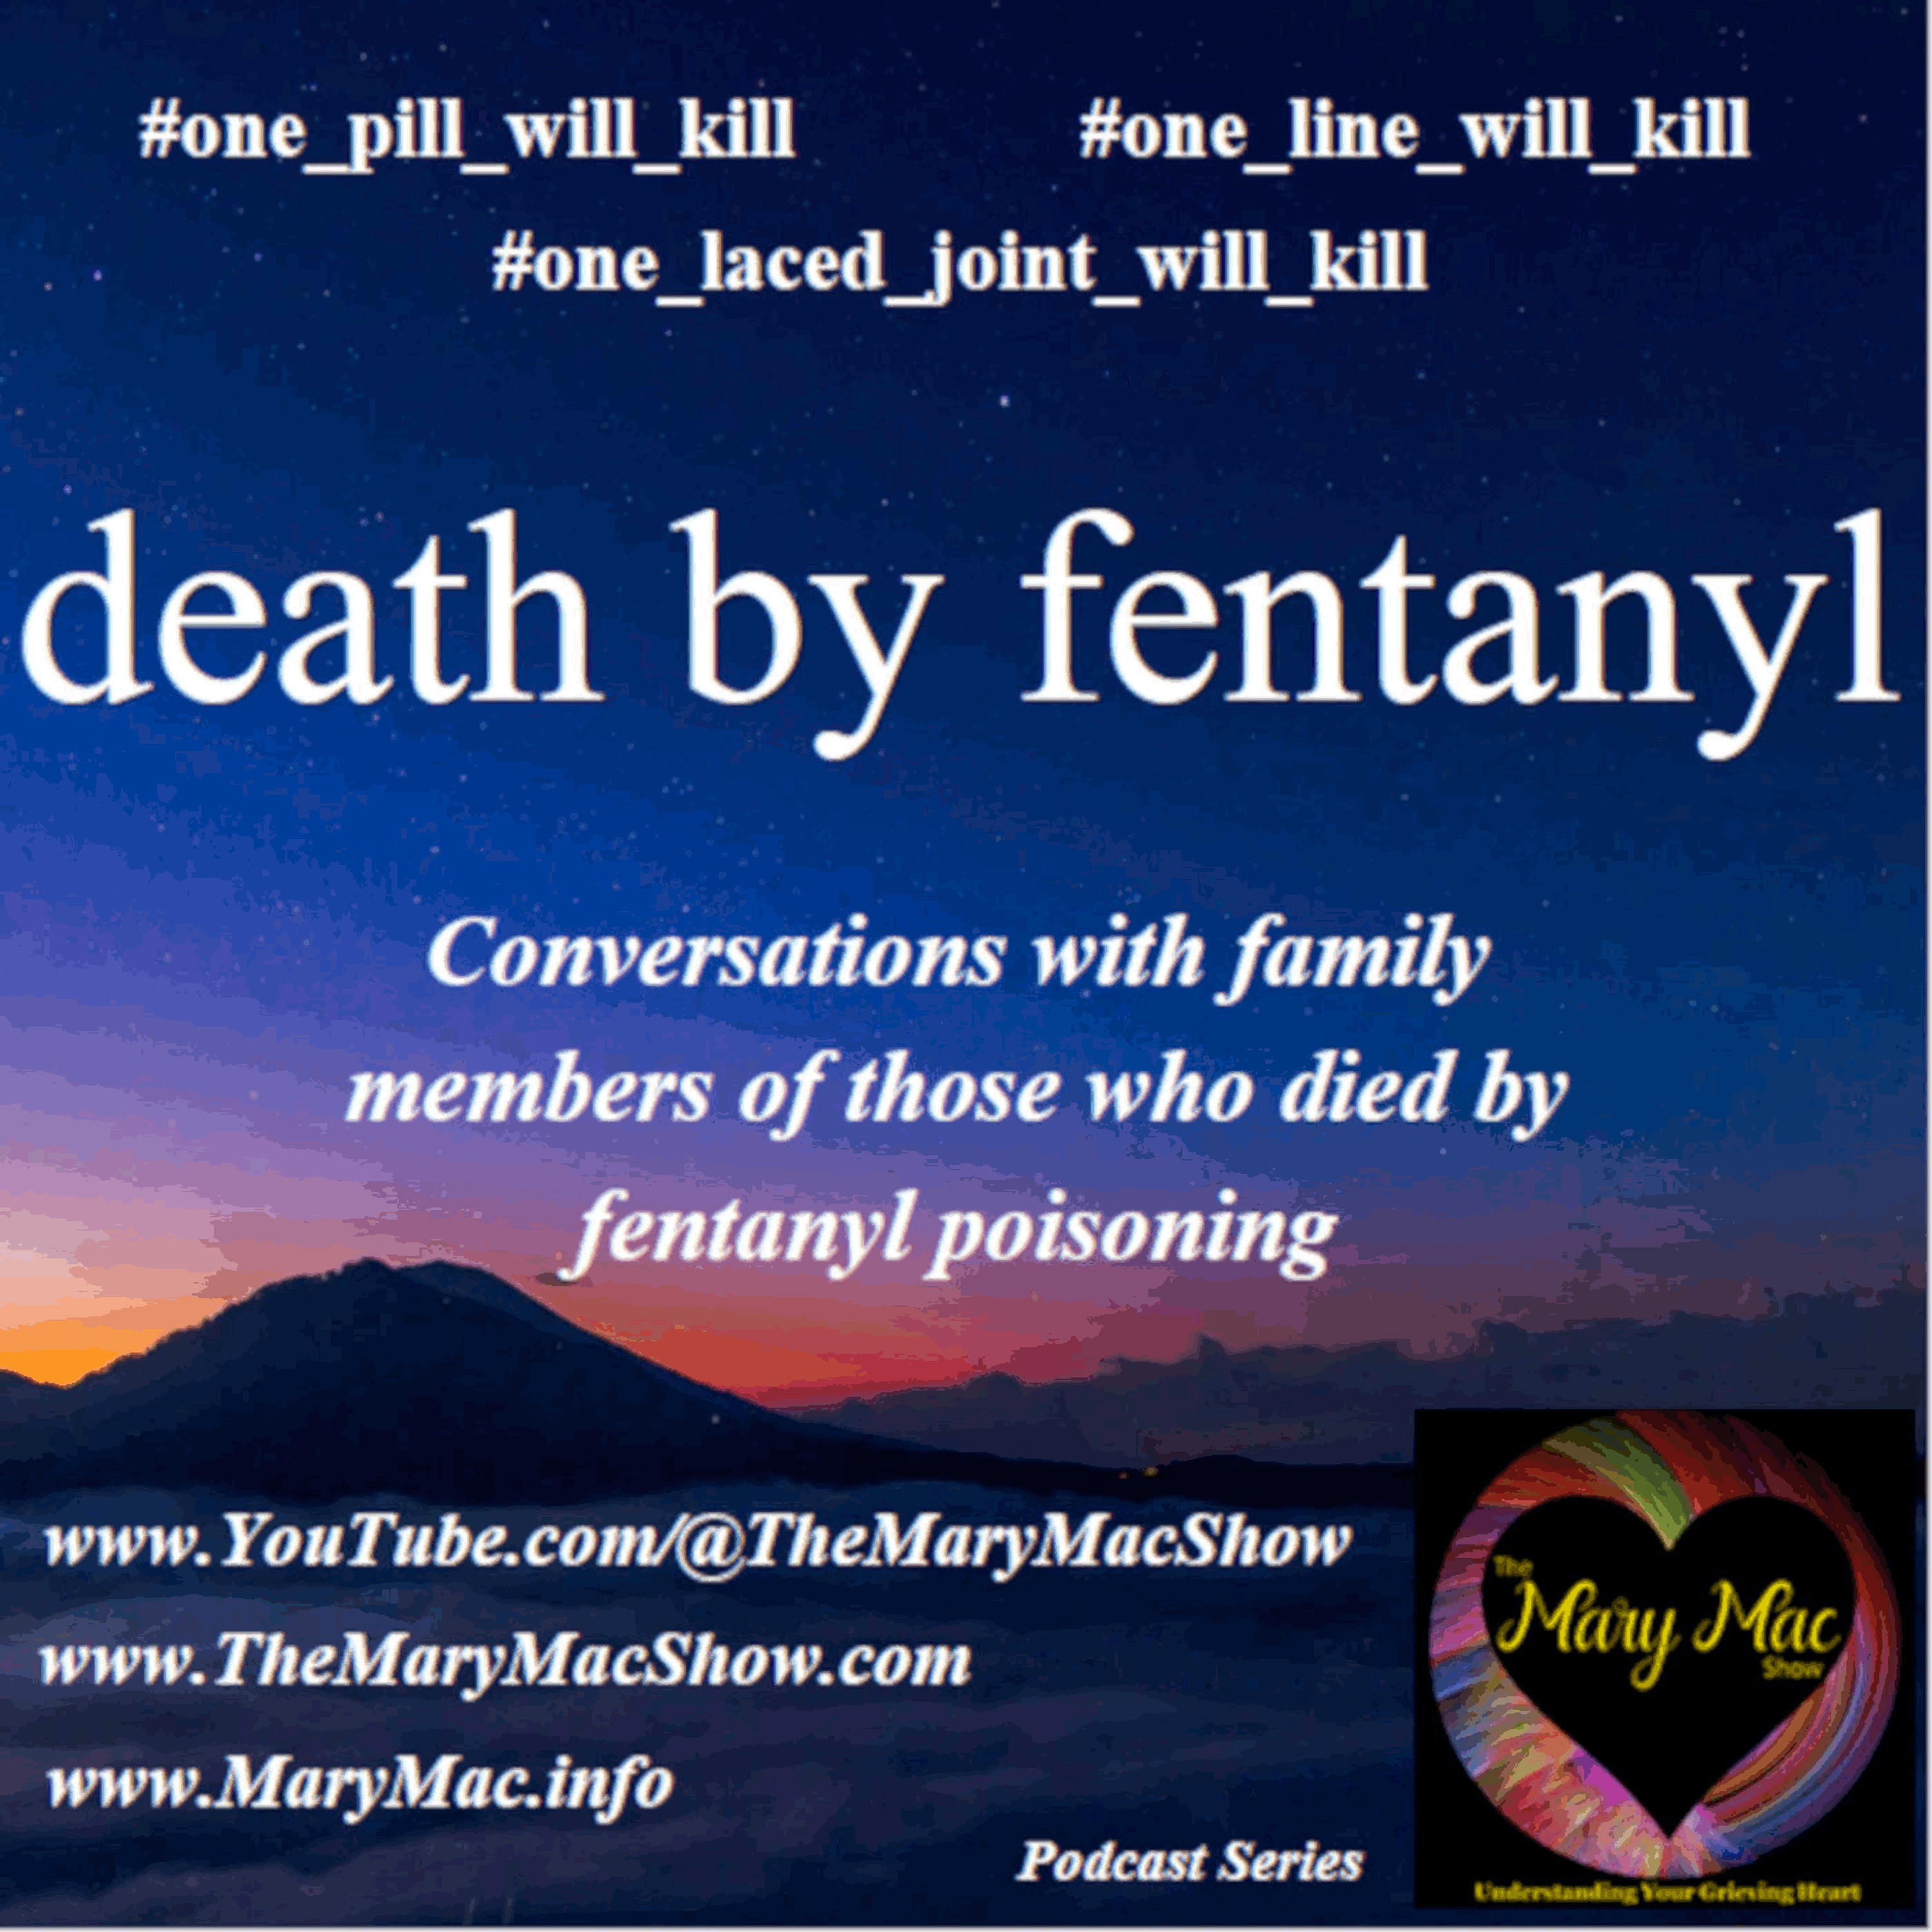 Death By Fentanyl Podcast Series | Rebecca Kiessling's 2 sons killed same evening | Part II